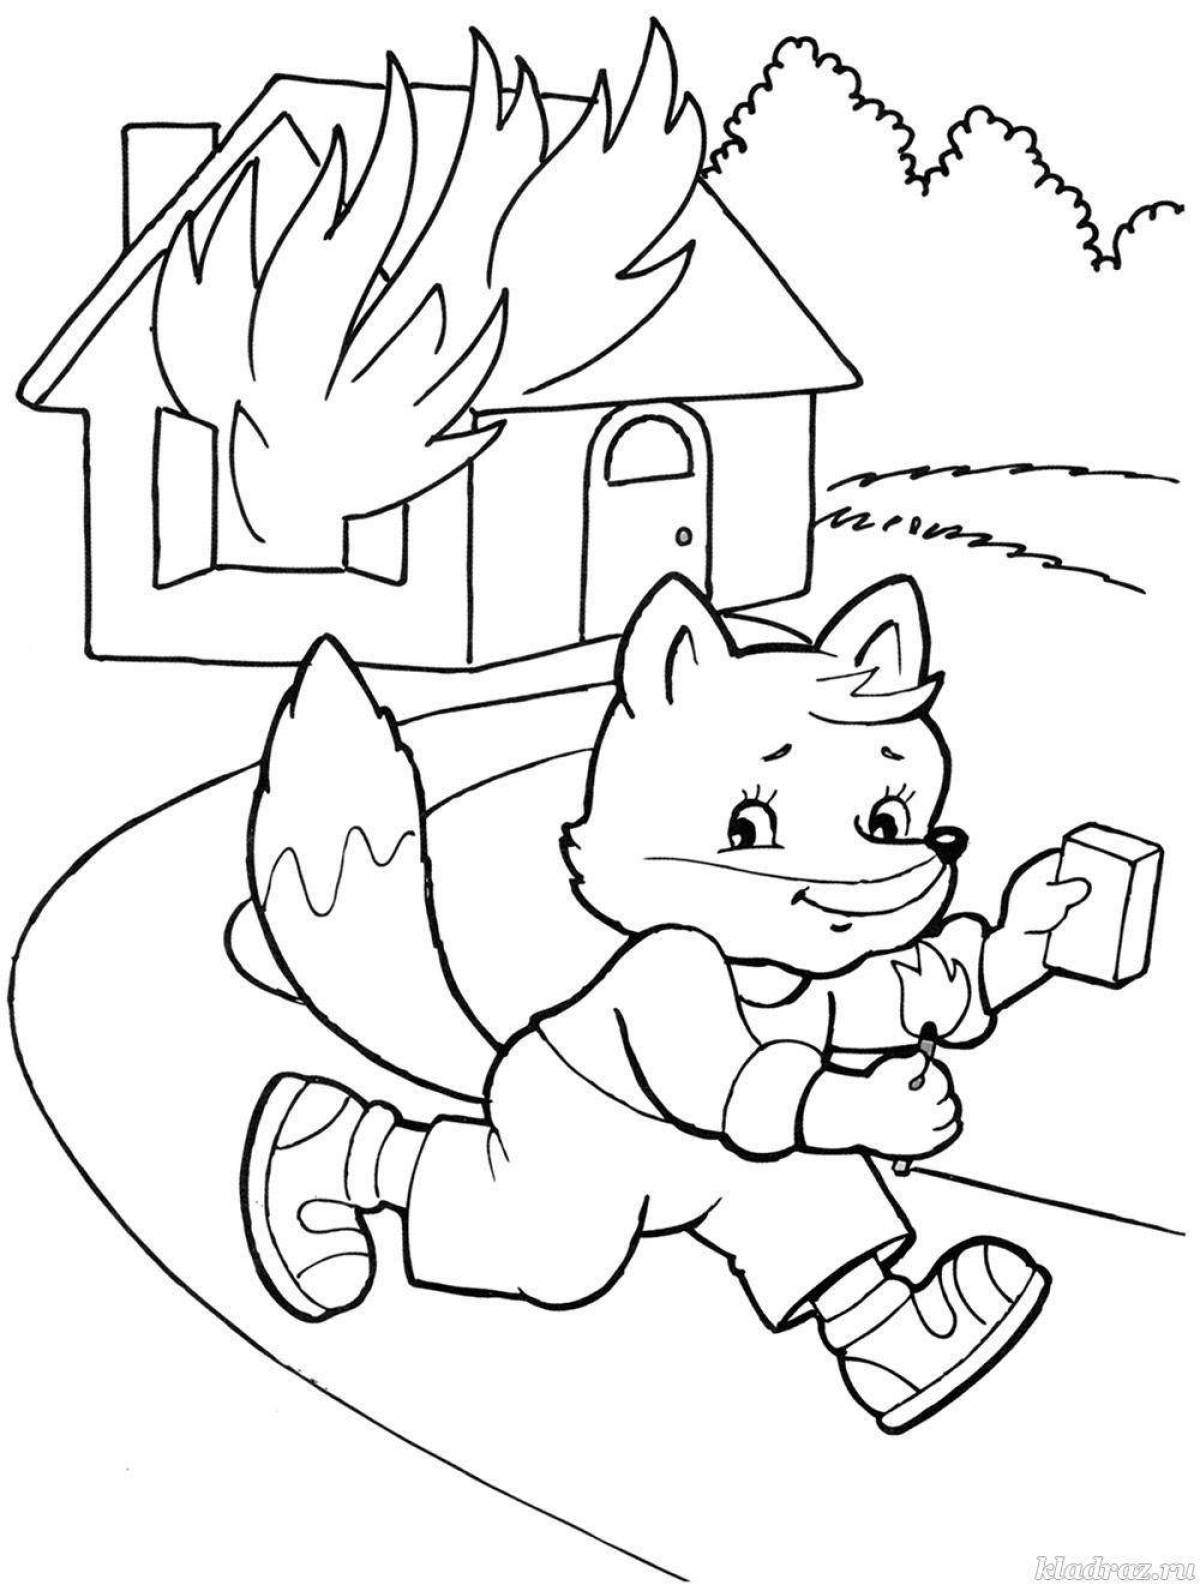 Joyful coloring pages with tails